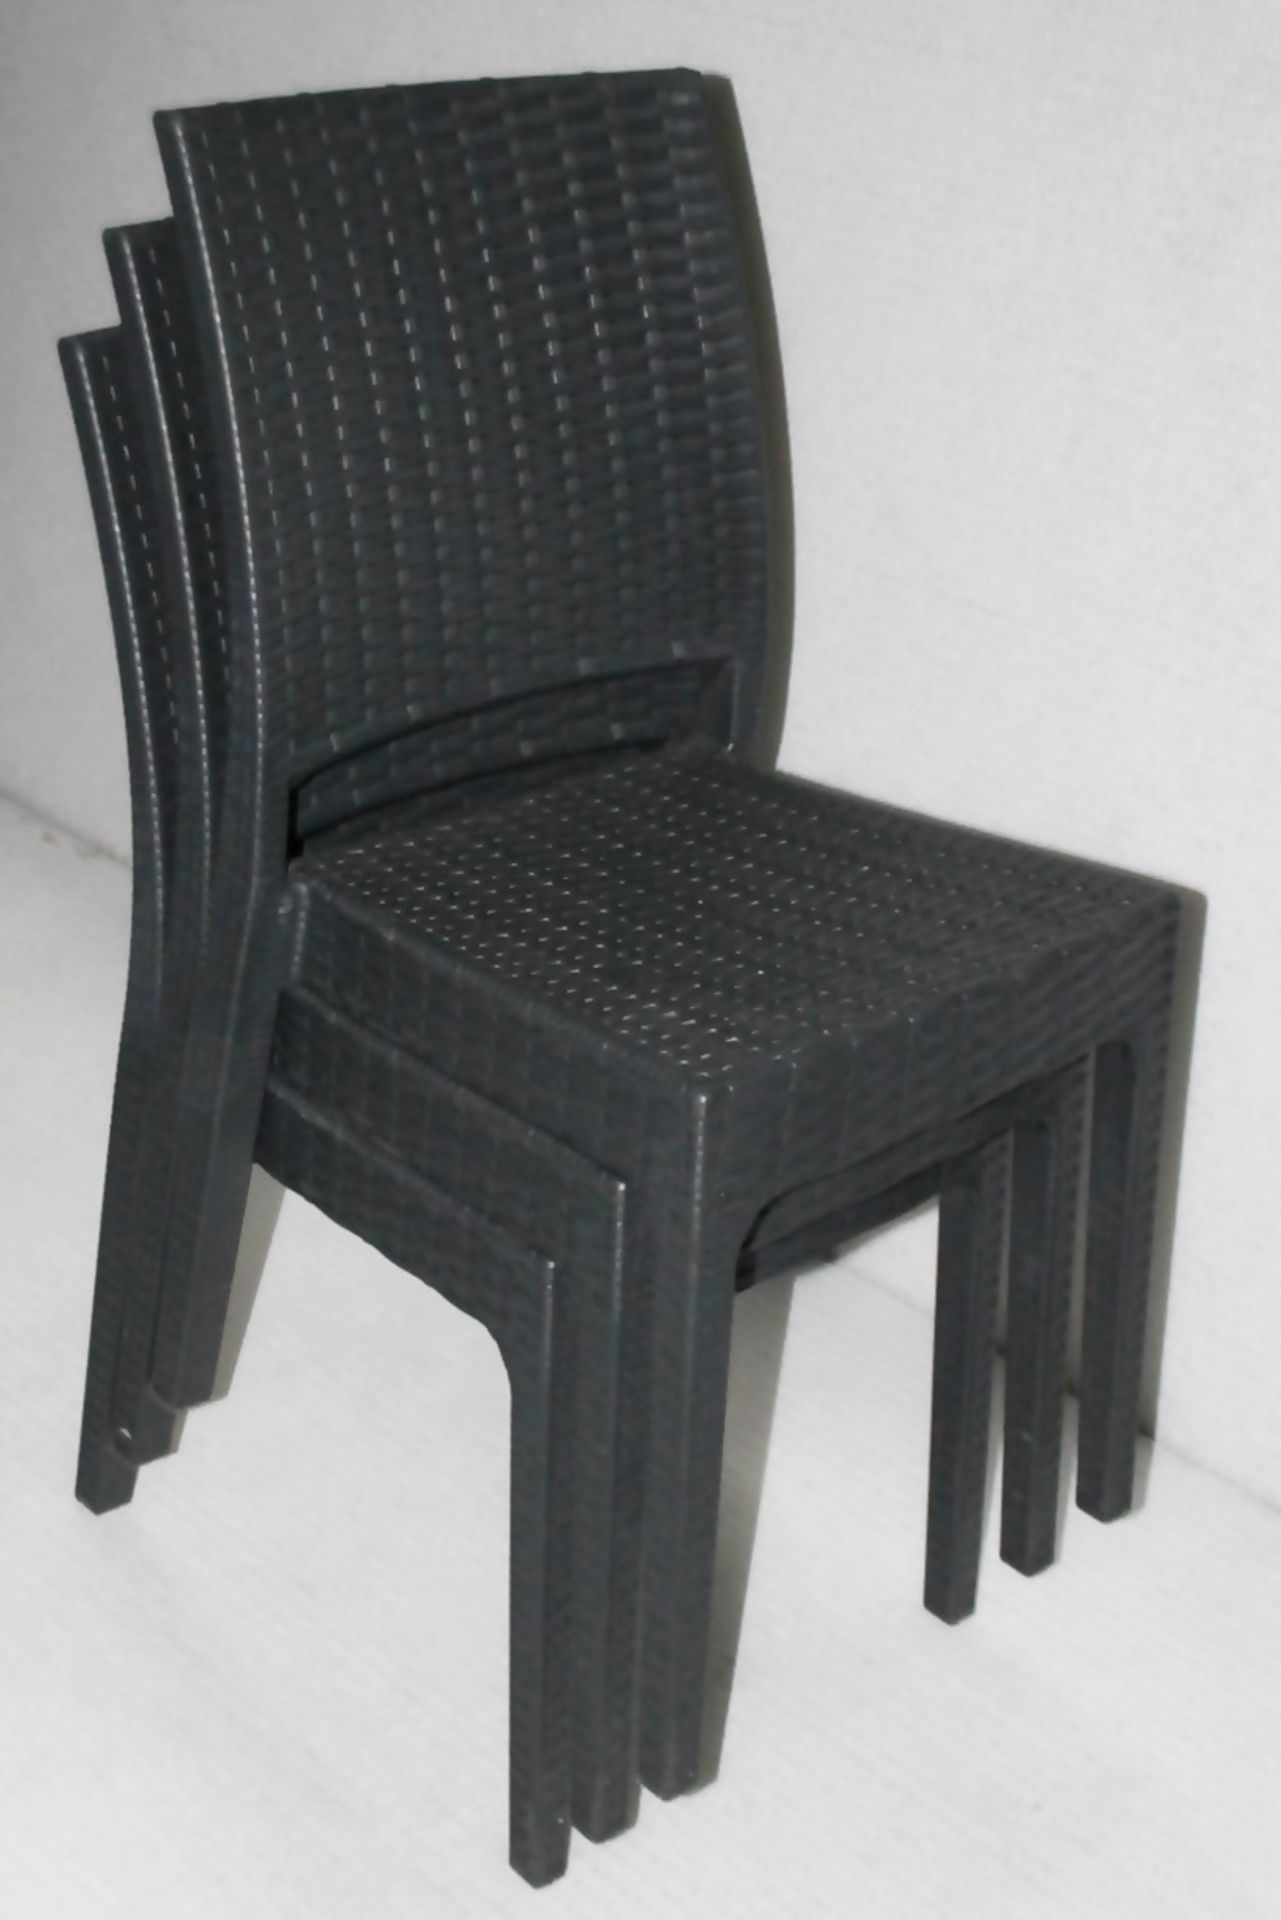 4 x SIESTA EXCLUSIVE 'Florida' Commercial Stackable Rattan-style Chairs In Dark Grey - RRP £320.00 - Image 5 of 13